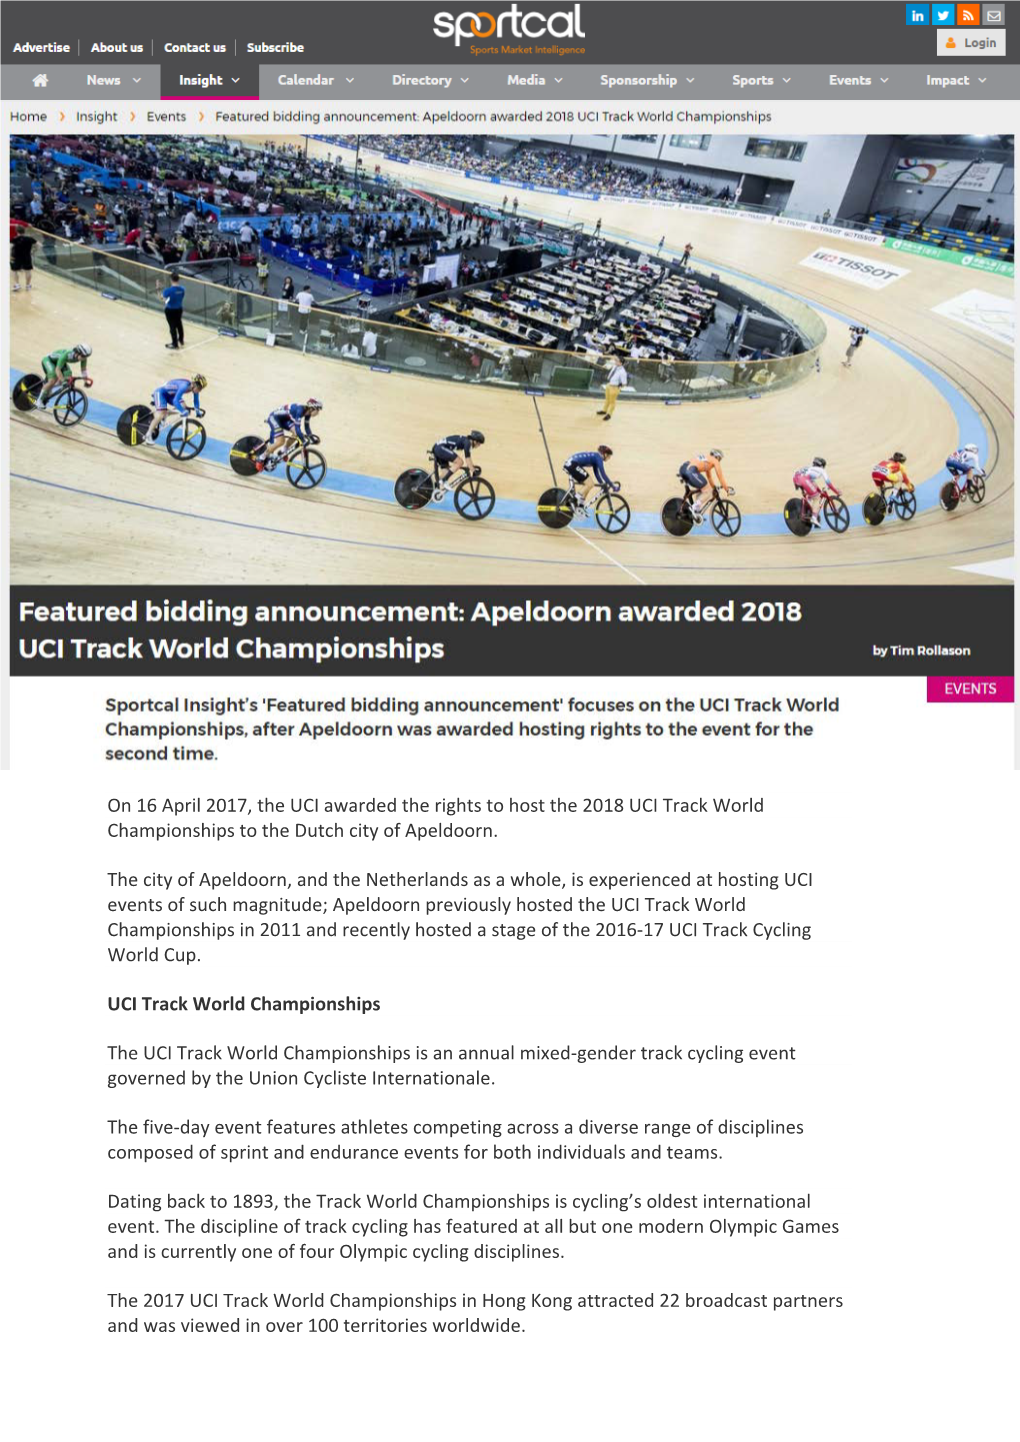 On 16 April 2017, the UCI Awarded the Rights to Host the 2018 UCI Track World Championships to the Dutch City of Apeldoorn